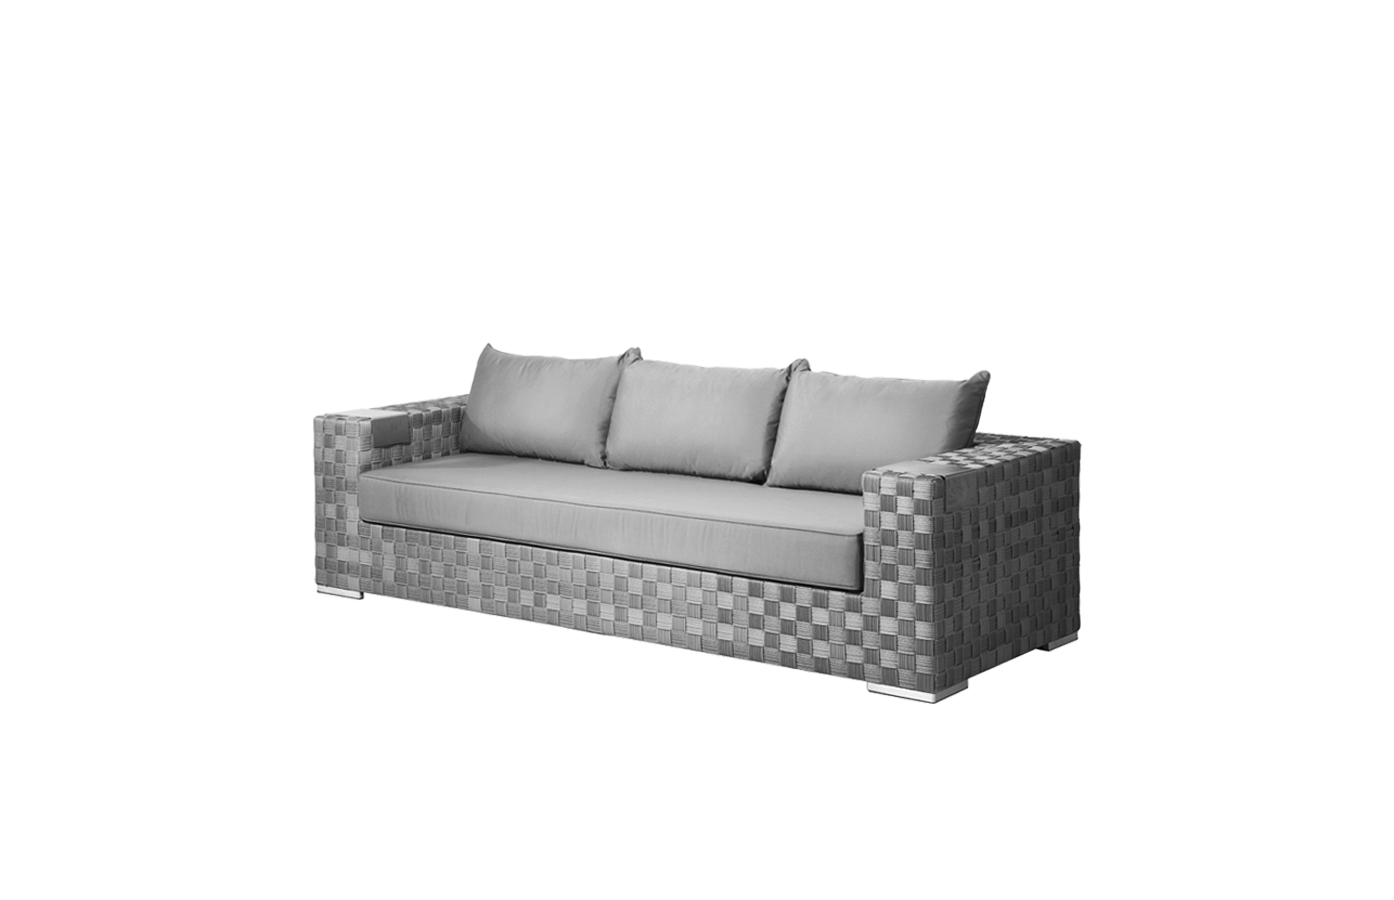 Purchasing for Outdoor Furniture Modern Fabric 3 Seater Sofa